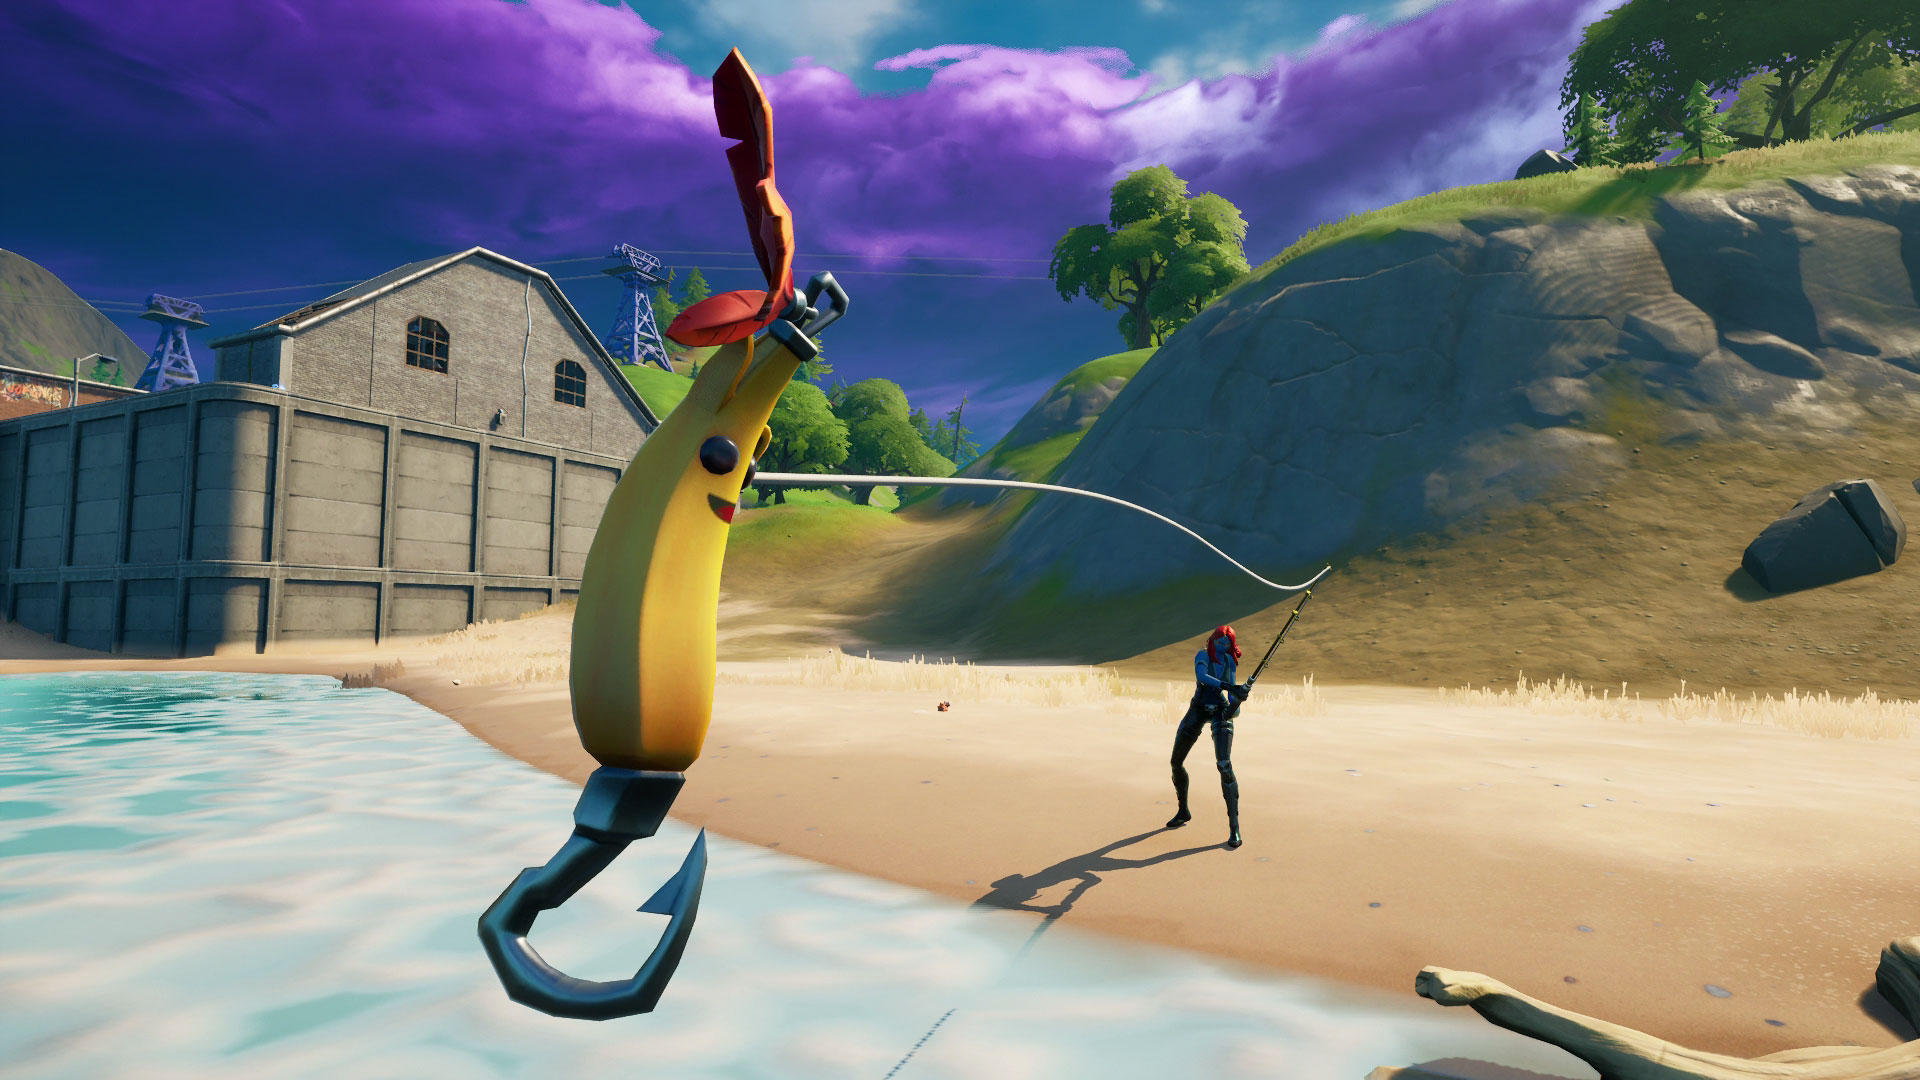 Fortnite Fishing Guide: Where to find a fishing rod and catch